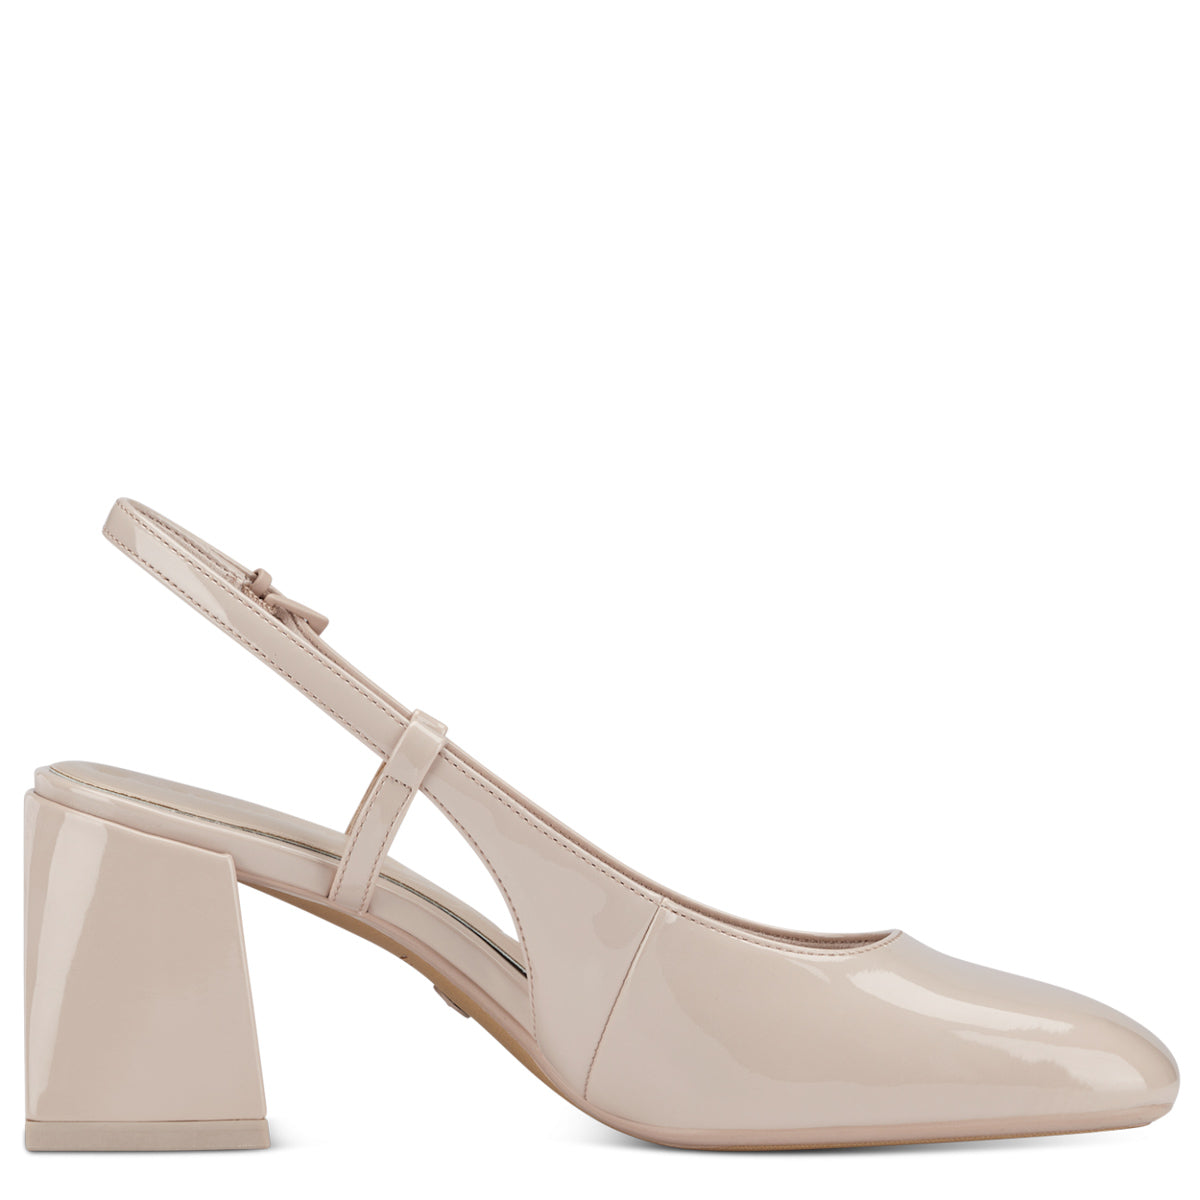 Inside view of the Elegant Nude Slingback, emphasizing the adjustable strap feature.